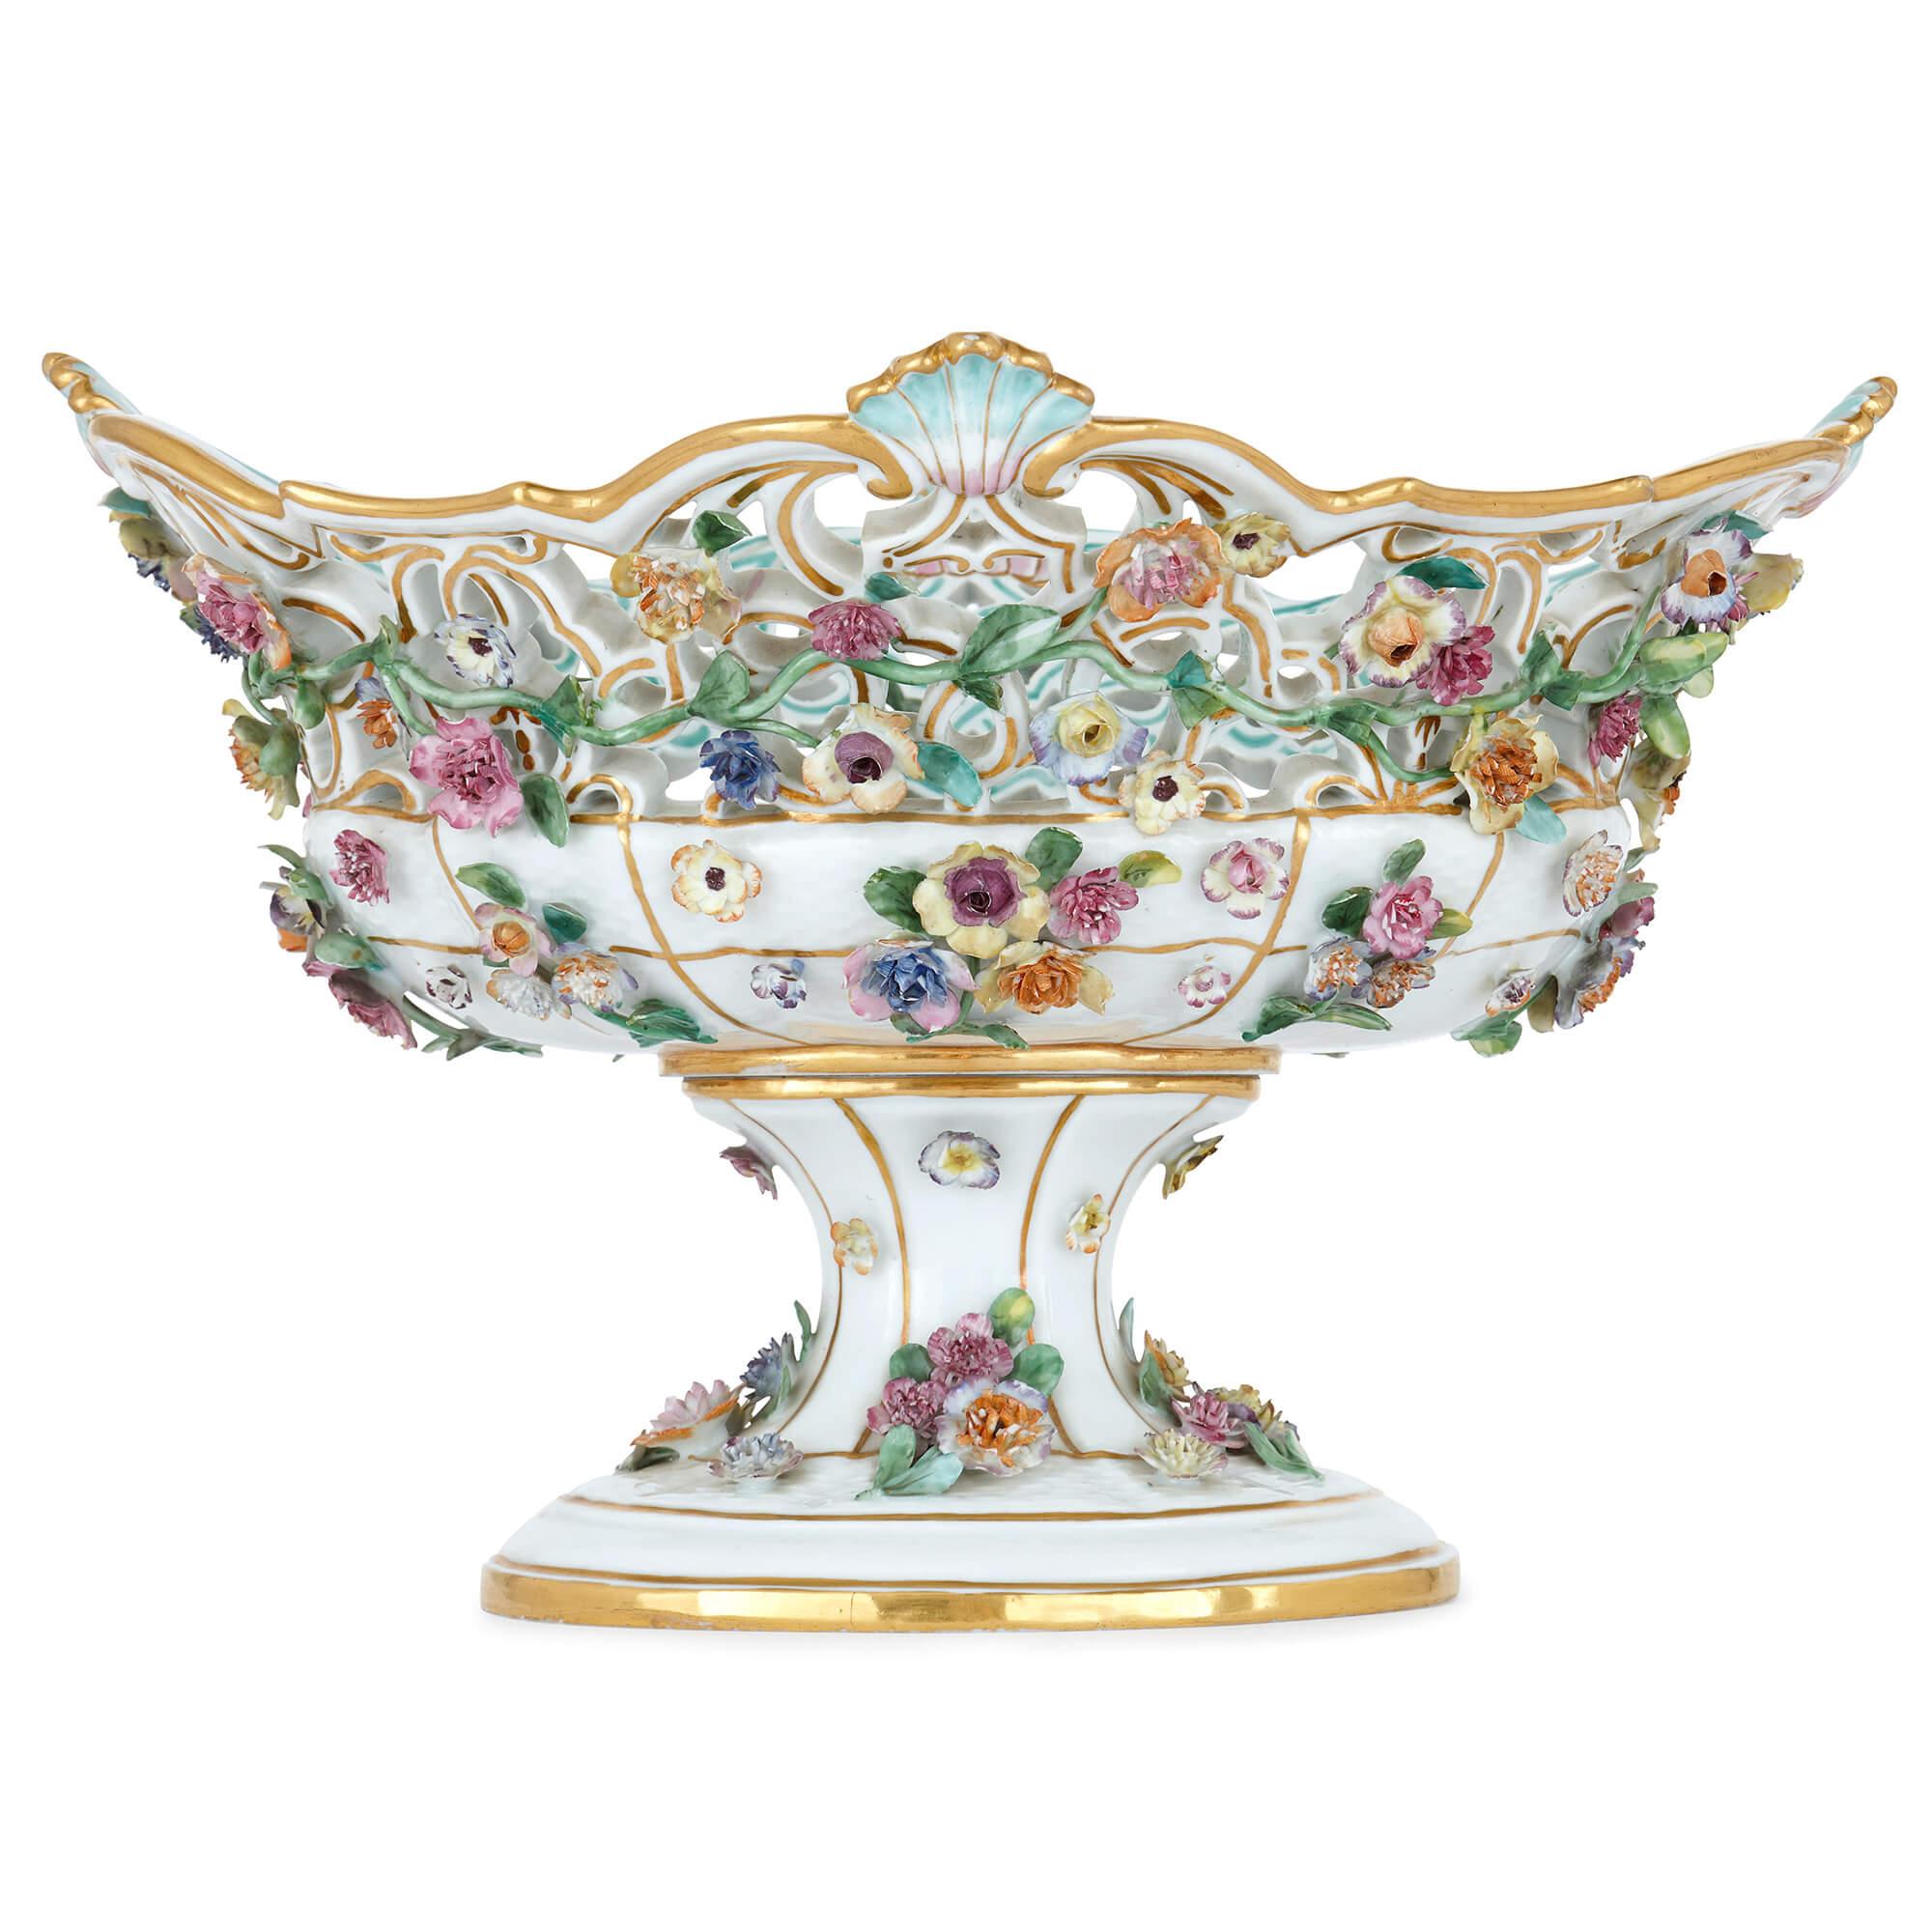 This exquisite antique porcelain fruit bowl is a stunning example of the superior craftsmanship of the Meissen ceramicists. In particular, the pierced, lace-like body of the bowl is demonstrative of the technical skills of its maker; as are the Fine